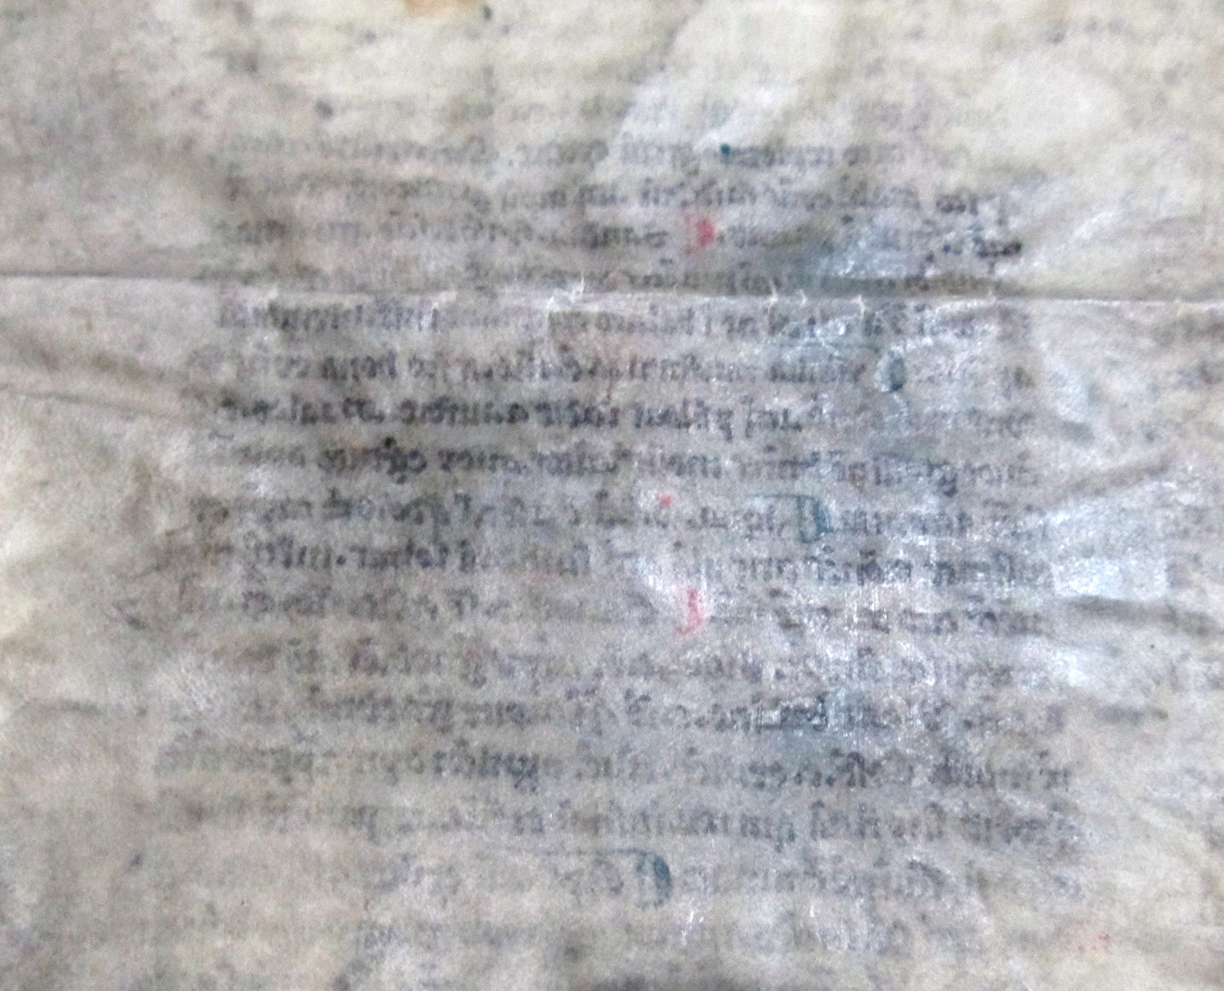 Show Through from the lower part of one column of text on the 'interior' of the bifolium onto its exterior. Reproduced by permission